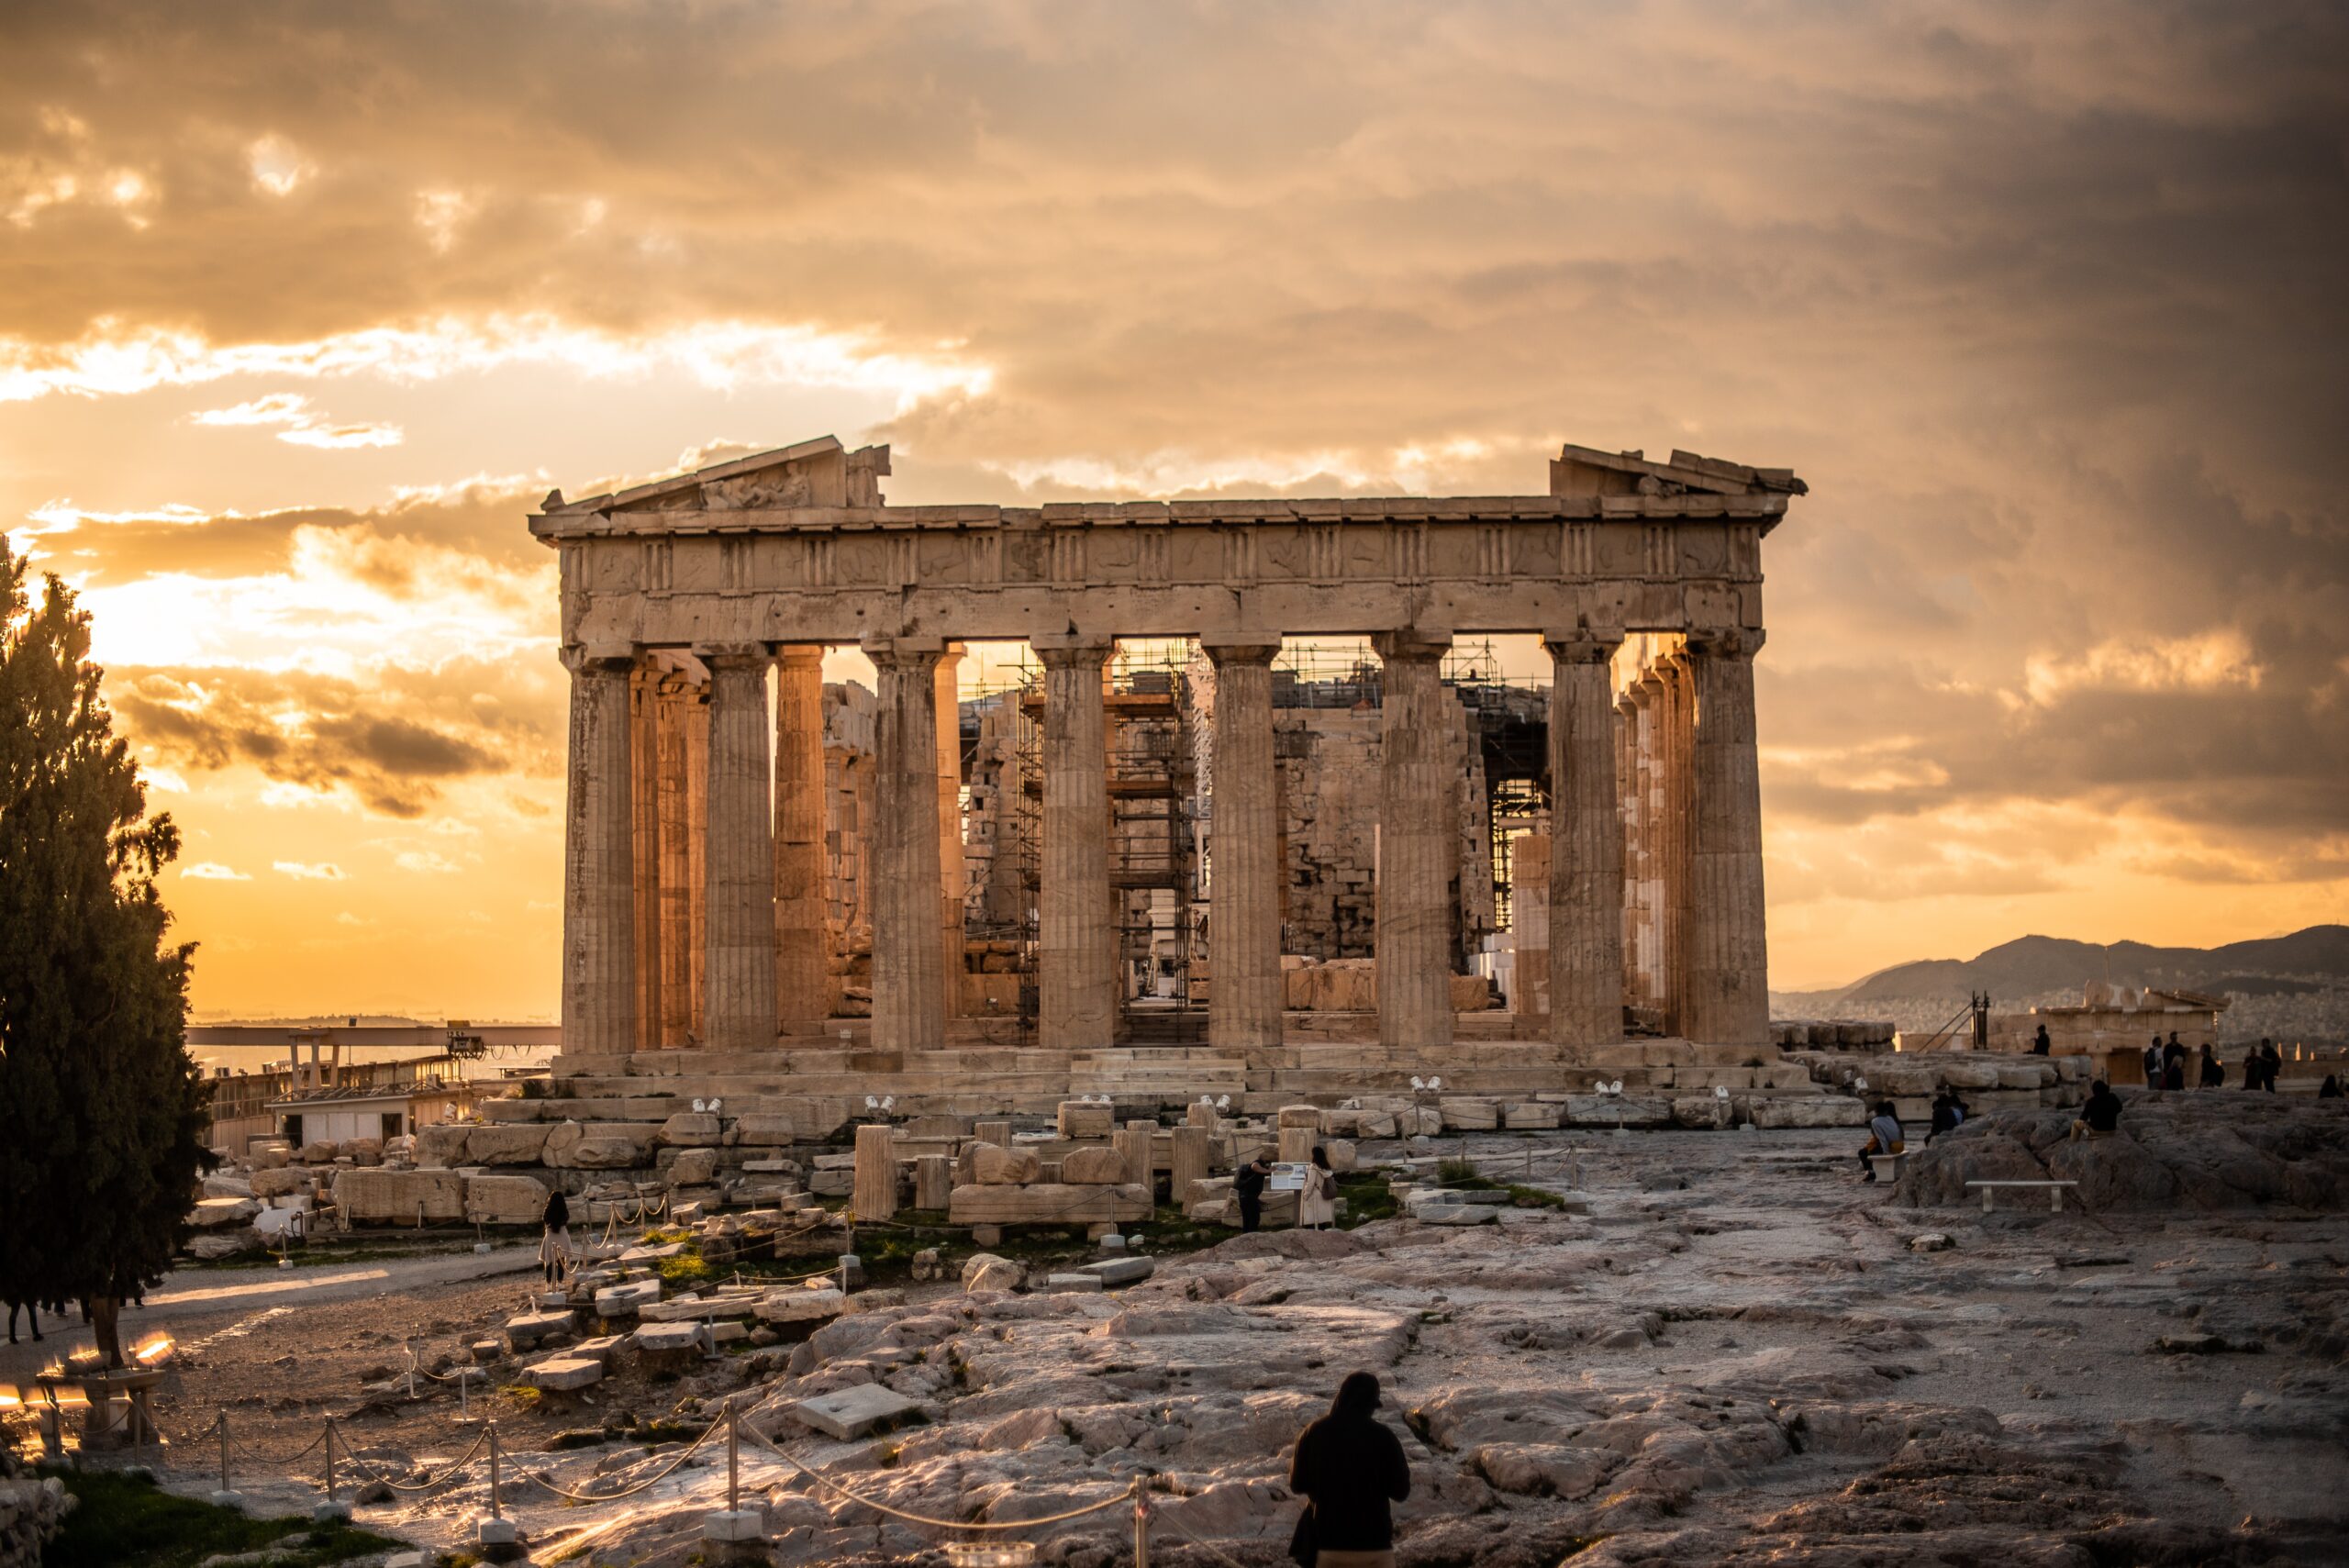 is athens expensive to visit 2022